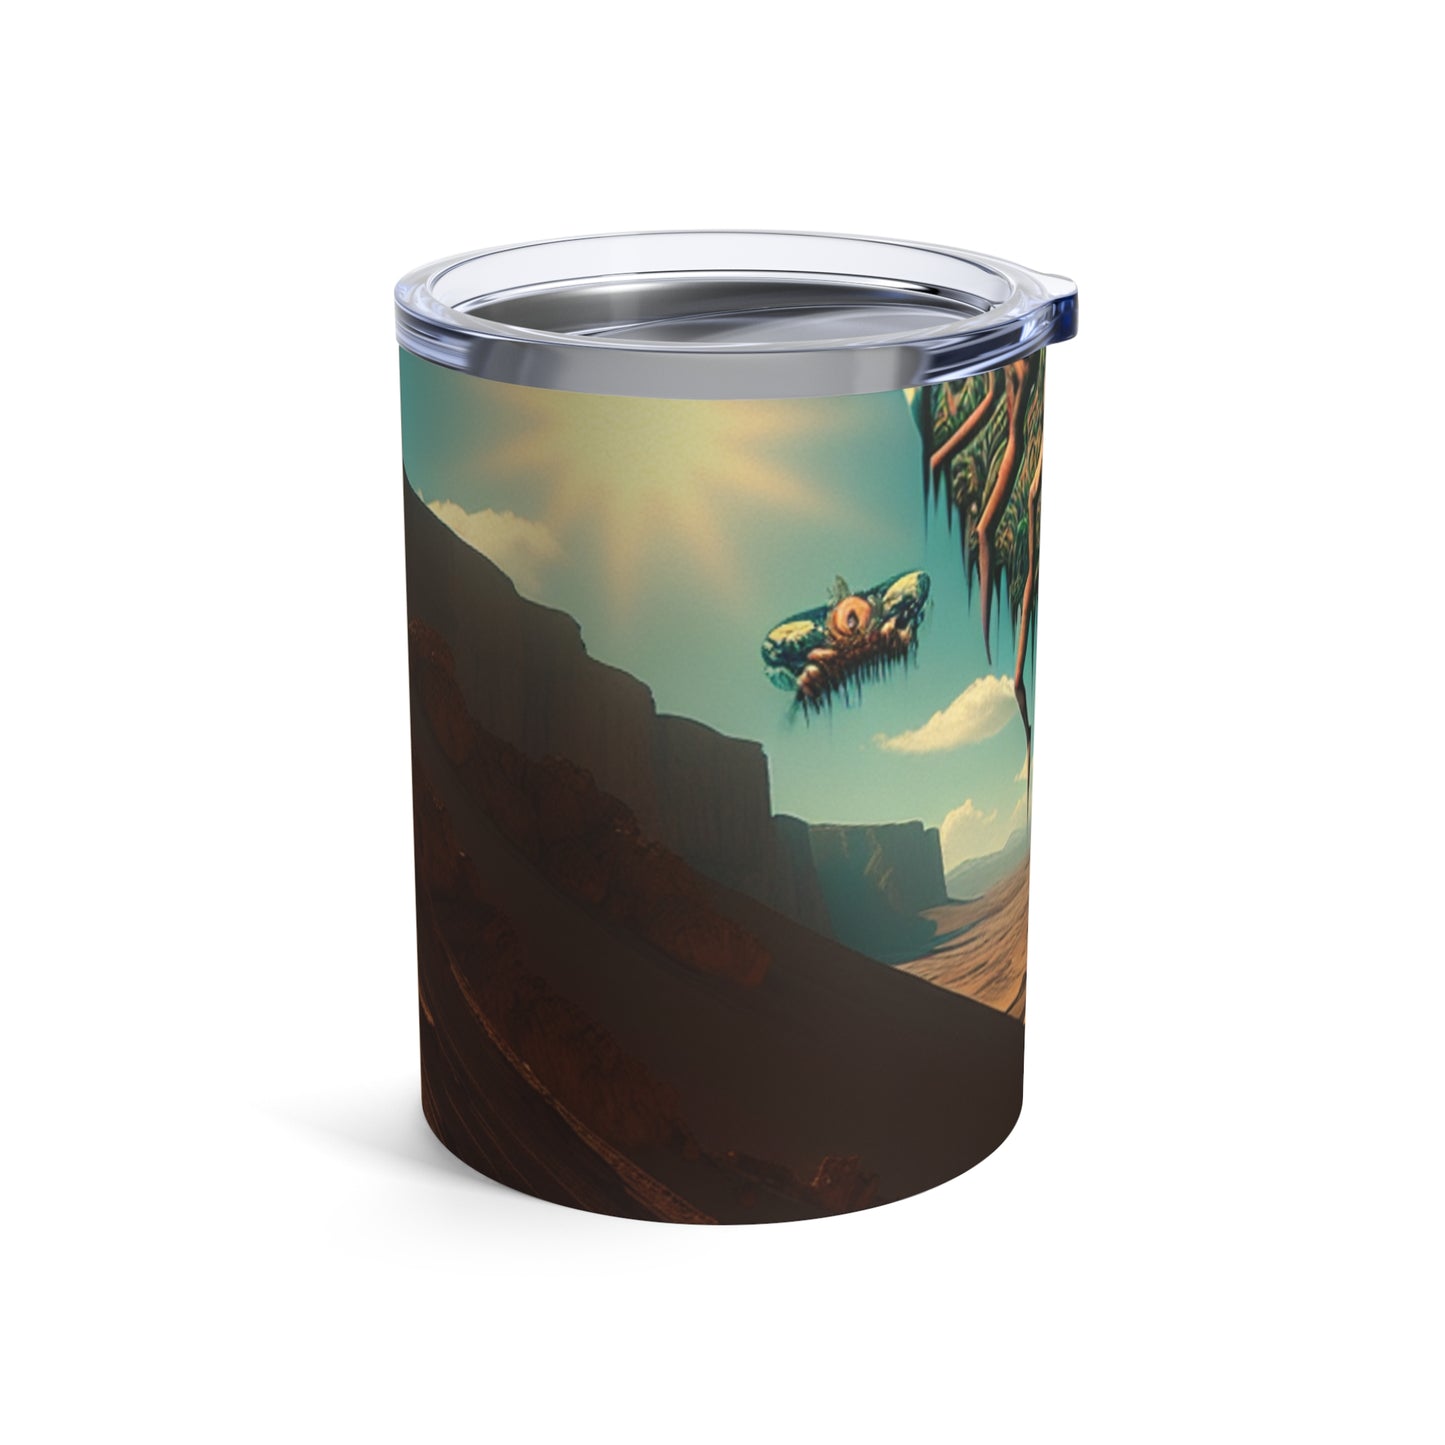 "Uprising in the Outback" - The Alien Tumbler 10oz Surrealism Style